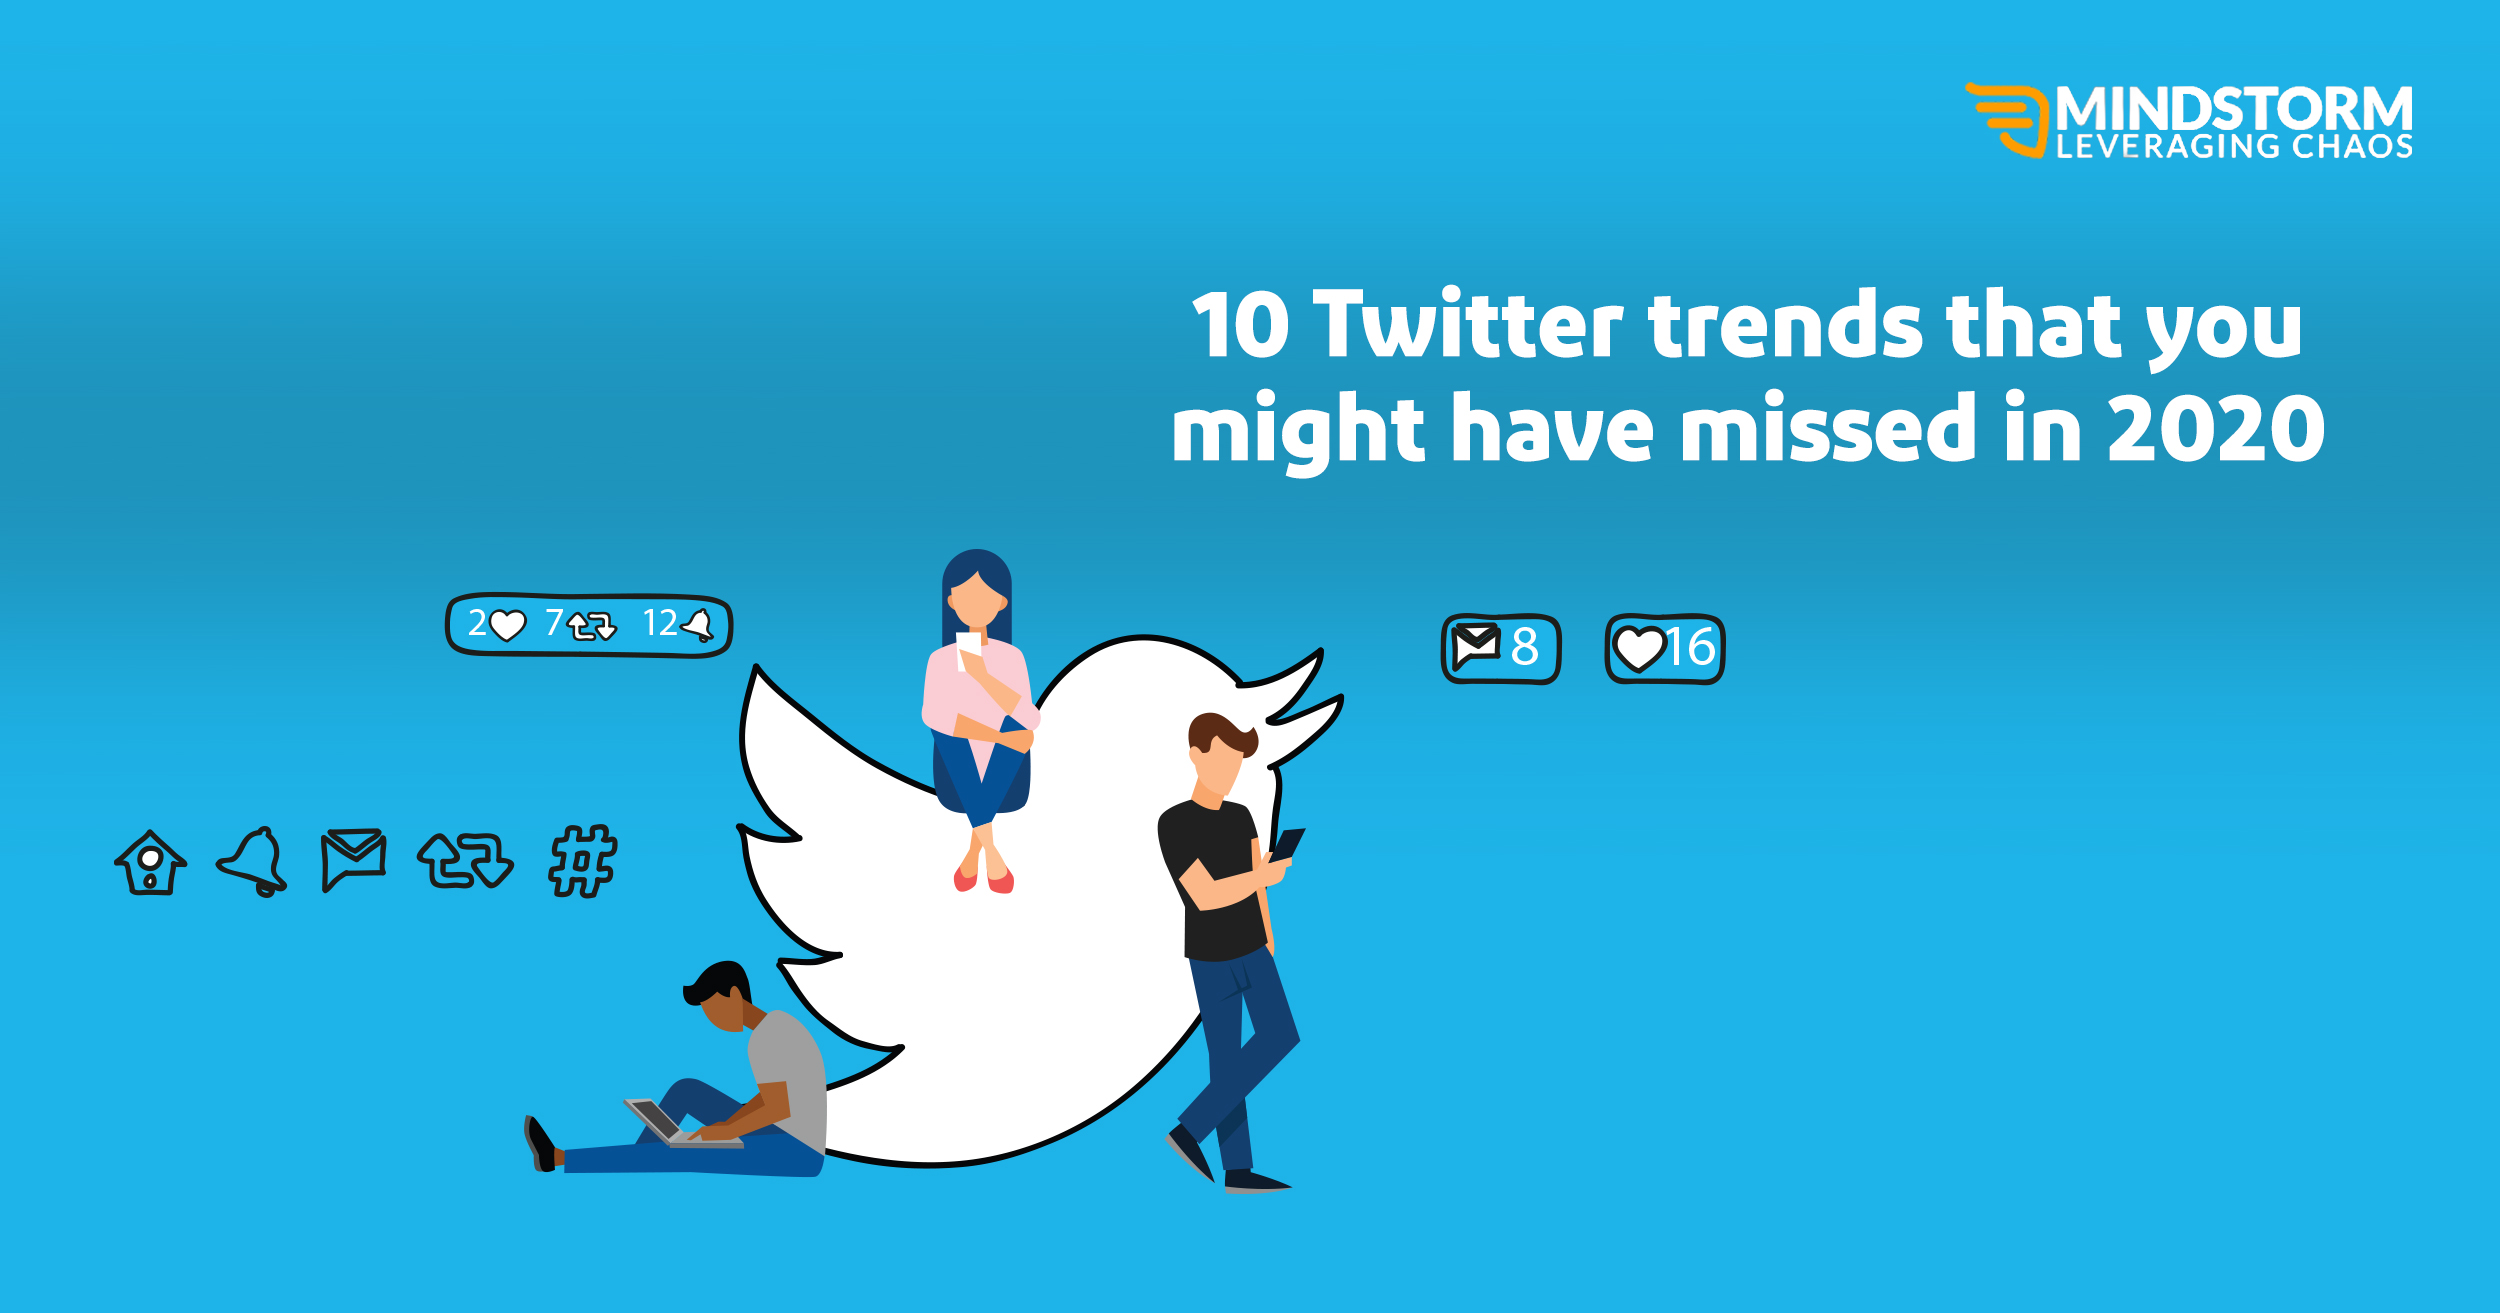 10 Twitter trends that you might have missed in 2020!